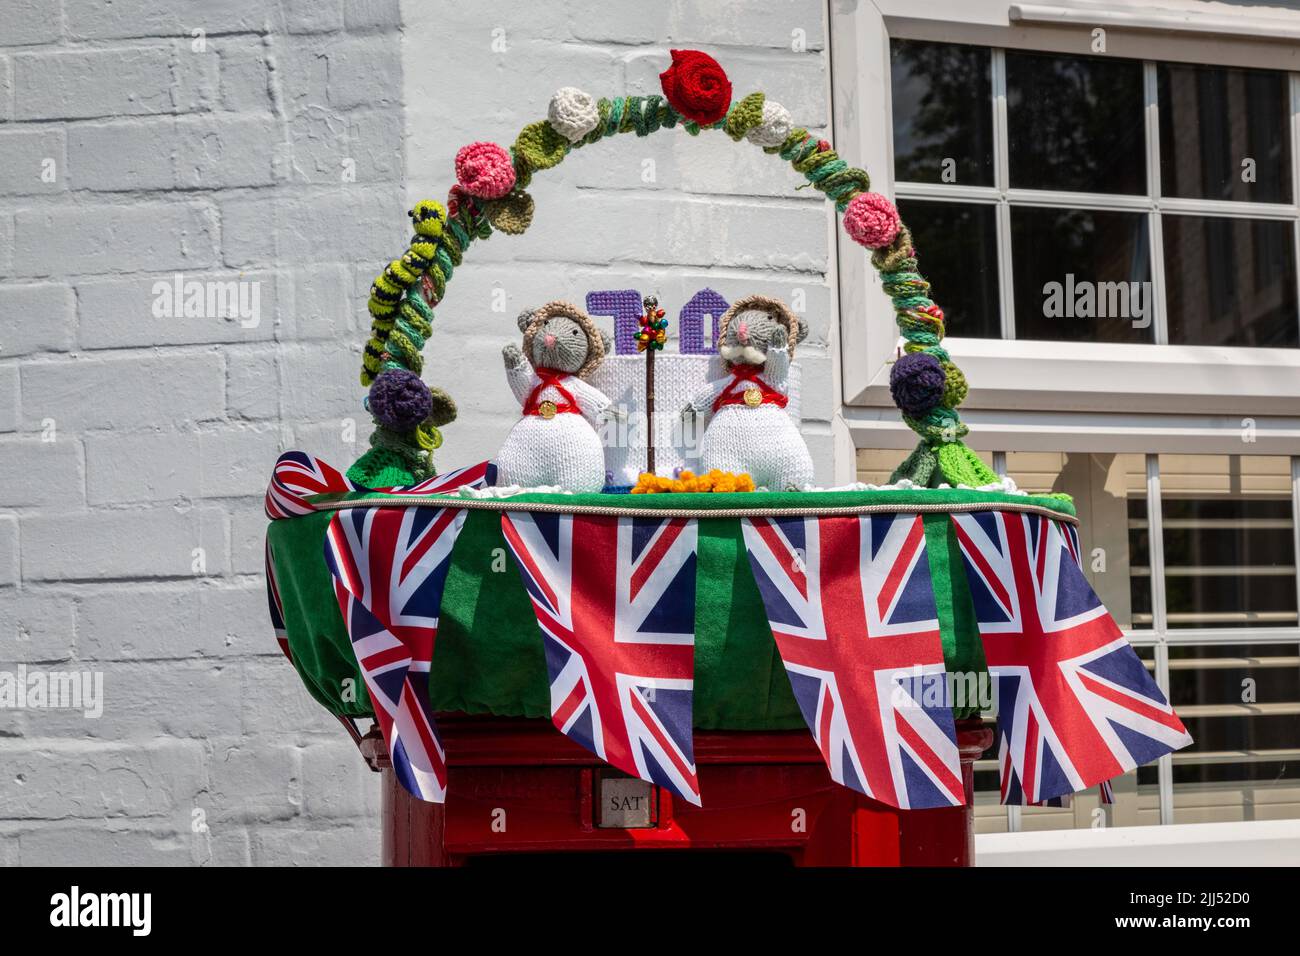 Crocheted mice on a postbox celebrate the Platinum Jubilee of Queen Elizabeth II. Stock Photo